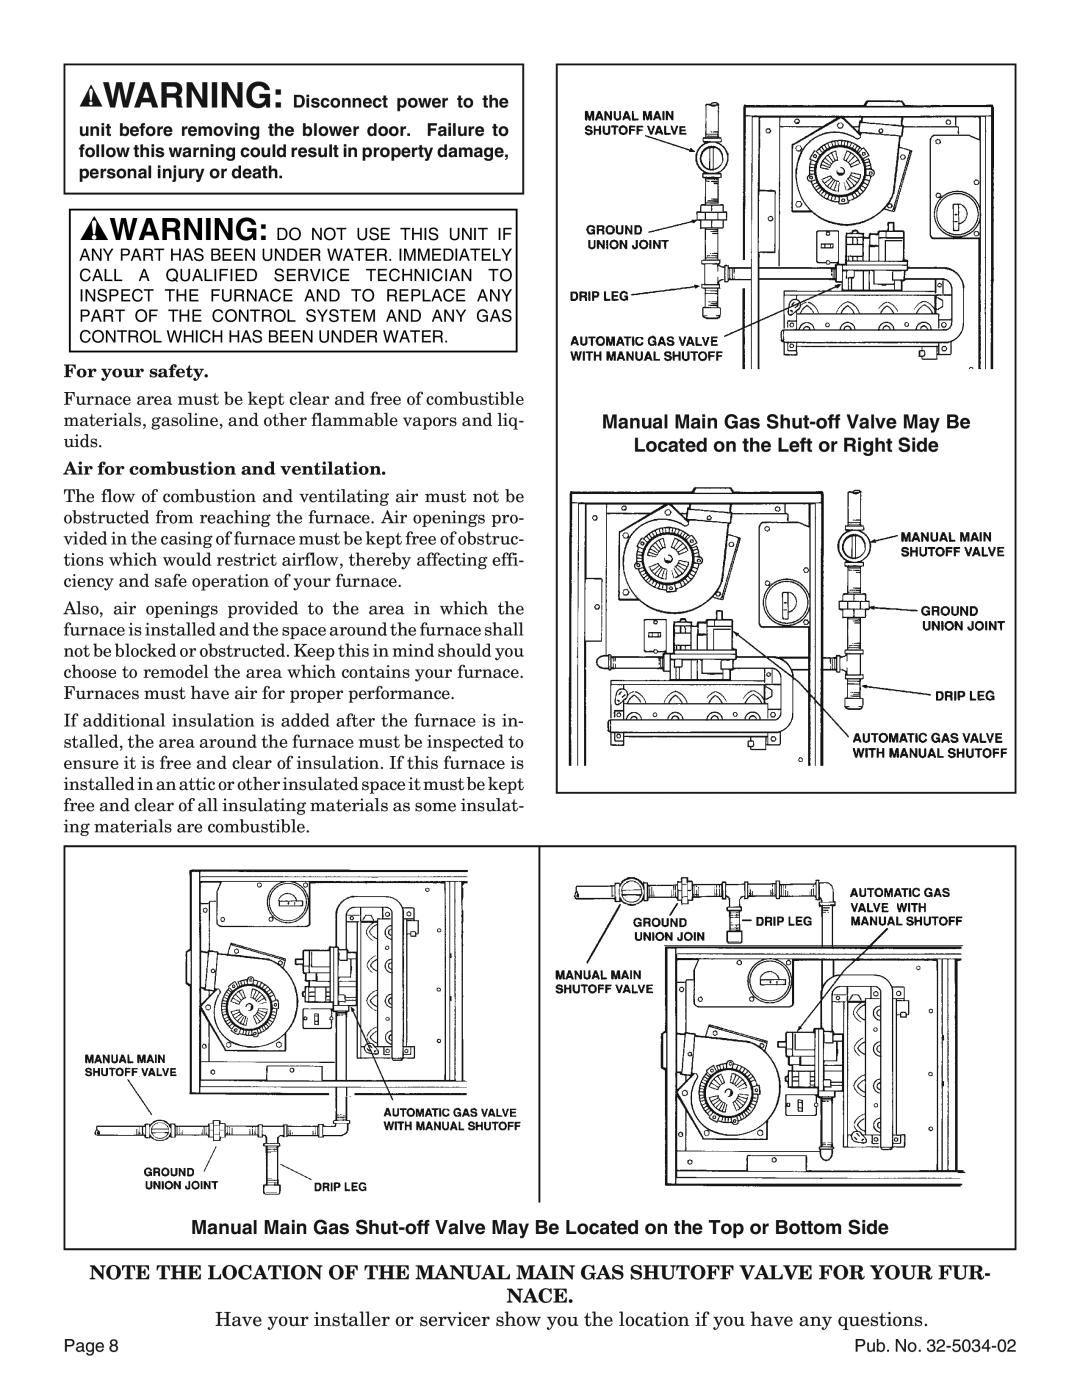 American Standard Noncondensing Gas Furnaces Manual Main Gas Shut-offValve May Be, Located on the Left or Right Side, Nace 